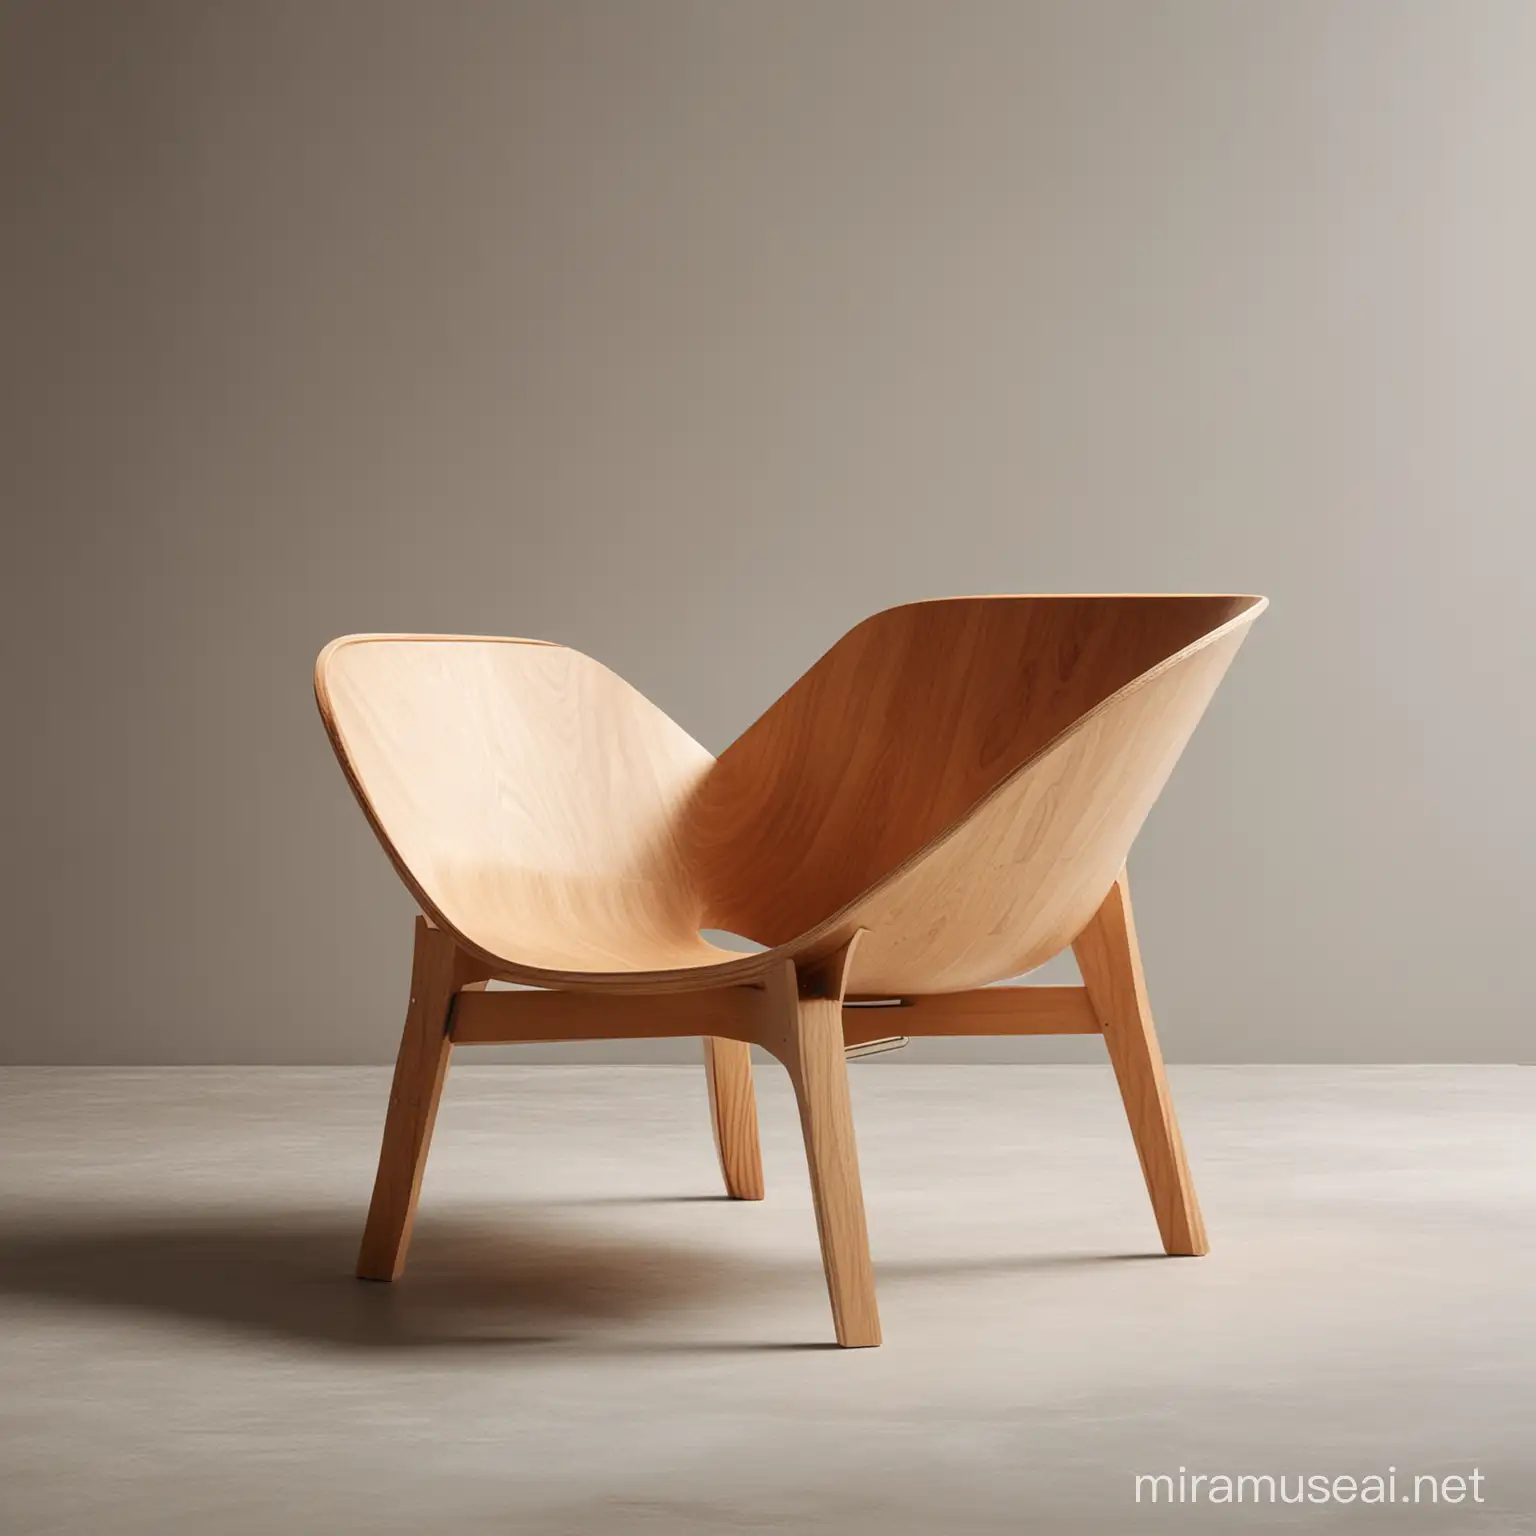 Modern Minimalist Wooden Armchair with Neutral Palette and Clean Lines